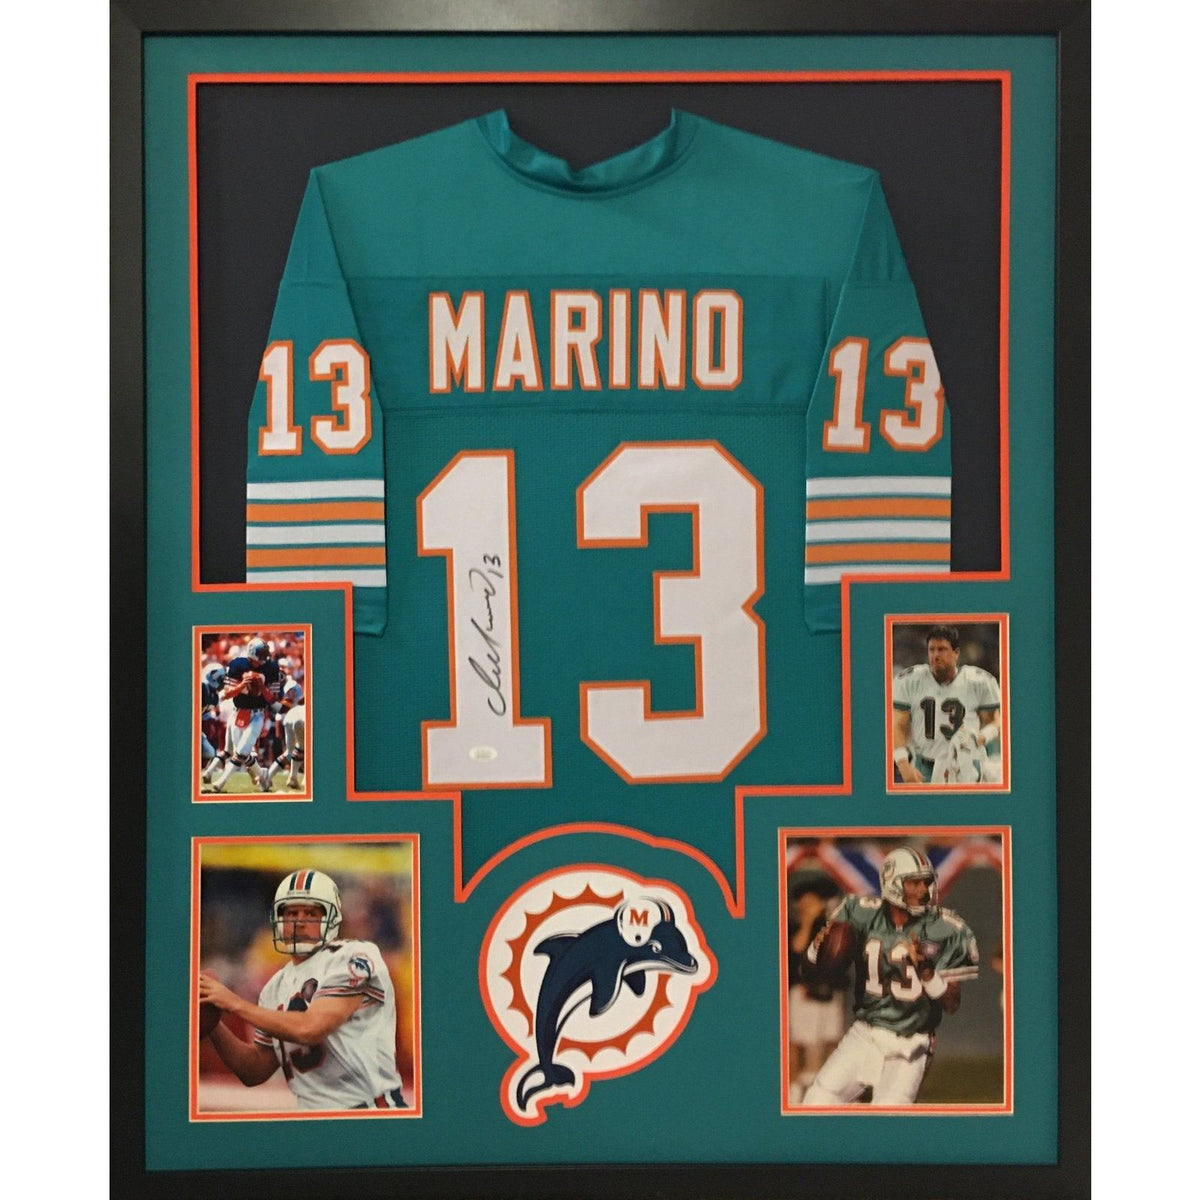 Dan Marino Framed Jersey JSA Autographed Signed Miami Dolphins TB4